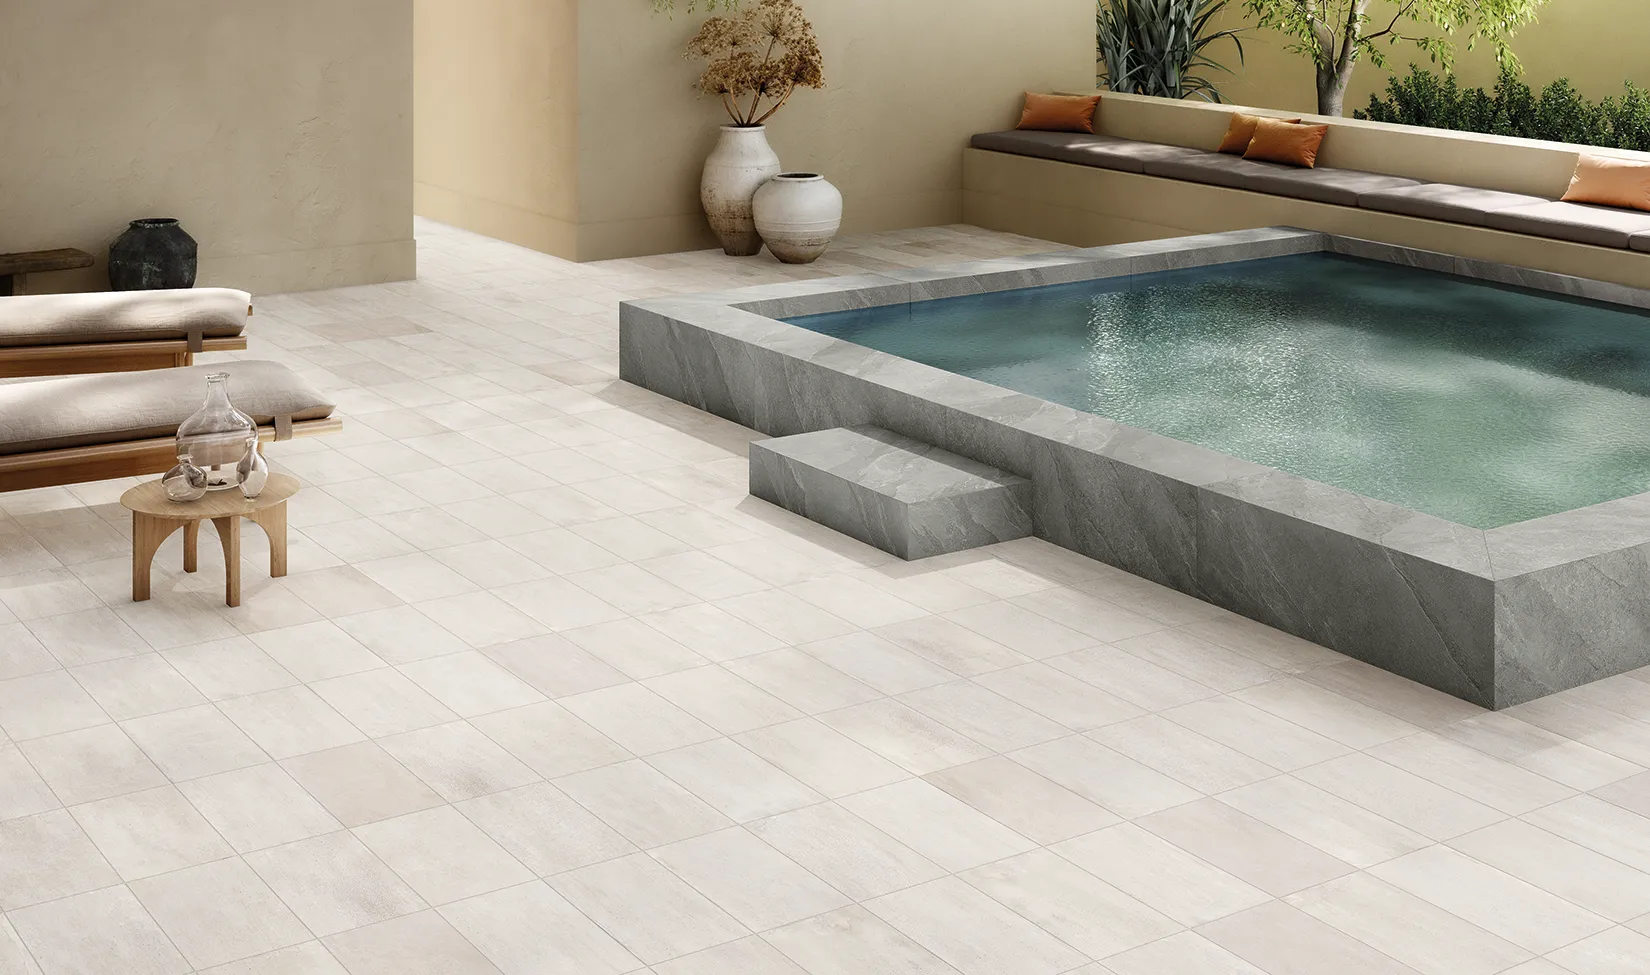 Milano Ivory cement-effect porcelain stoneware floor from the Street collection, laid in a chic outdoor space by a modern pool with dark stone steps and stylish garden furniture.